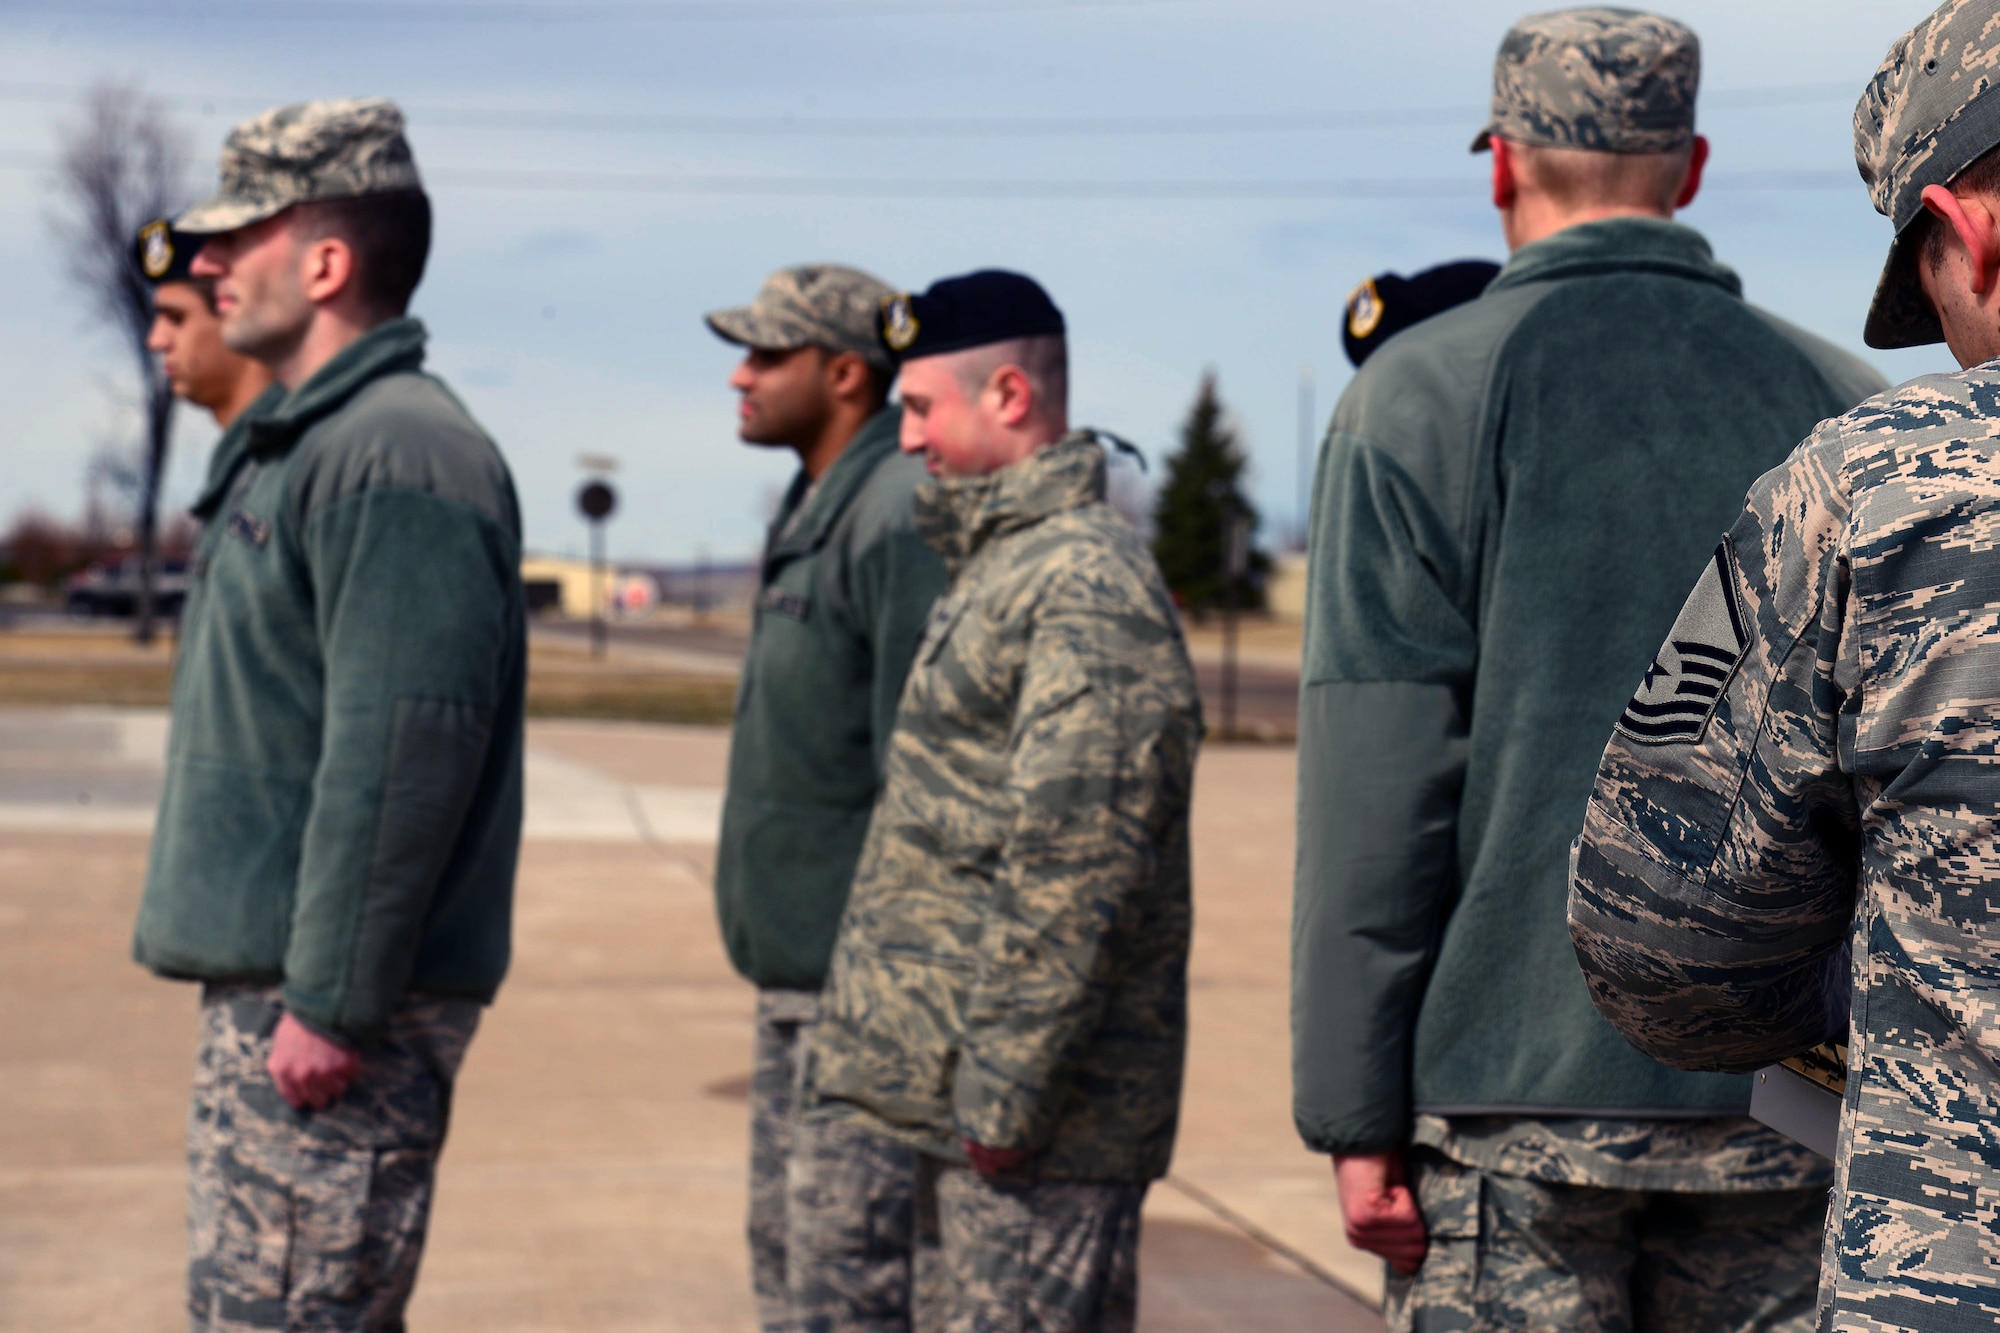 Airmen from the Malmstrom Airman Leadership School perform drill evaulations March 14, 2017, at Malmstrom Air Force Base, Mont. Drill evaluations are a part of the ALS cirriculum and are designed to honor military tradition and teach students leadership and followership traits. (U.S. Air Force photo/Senior Airman Magen M. Reeves)